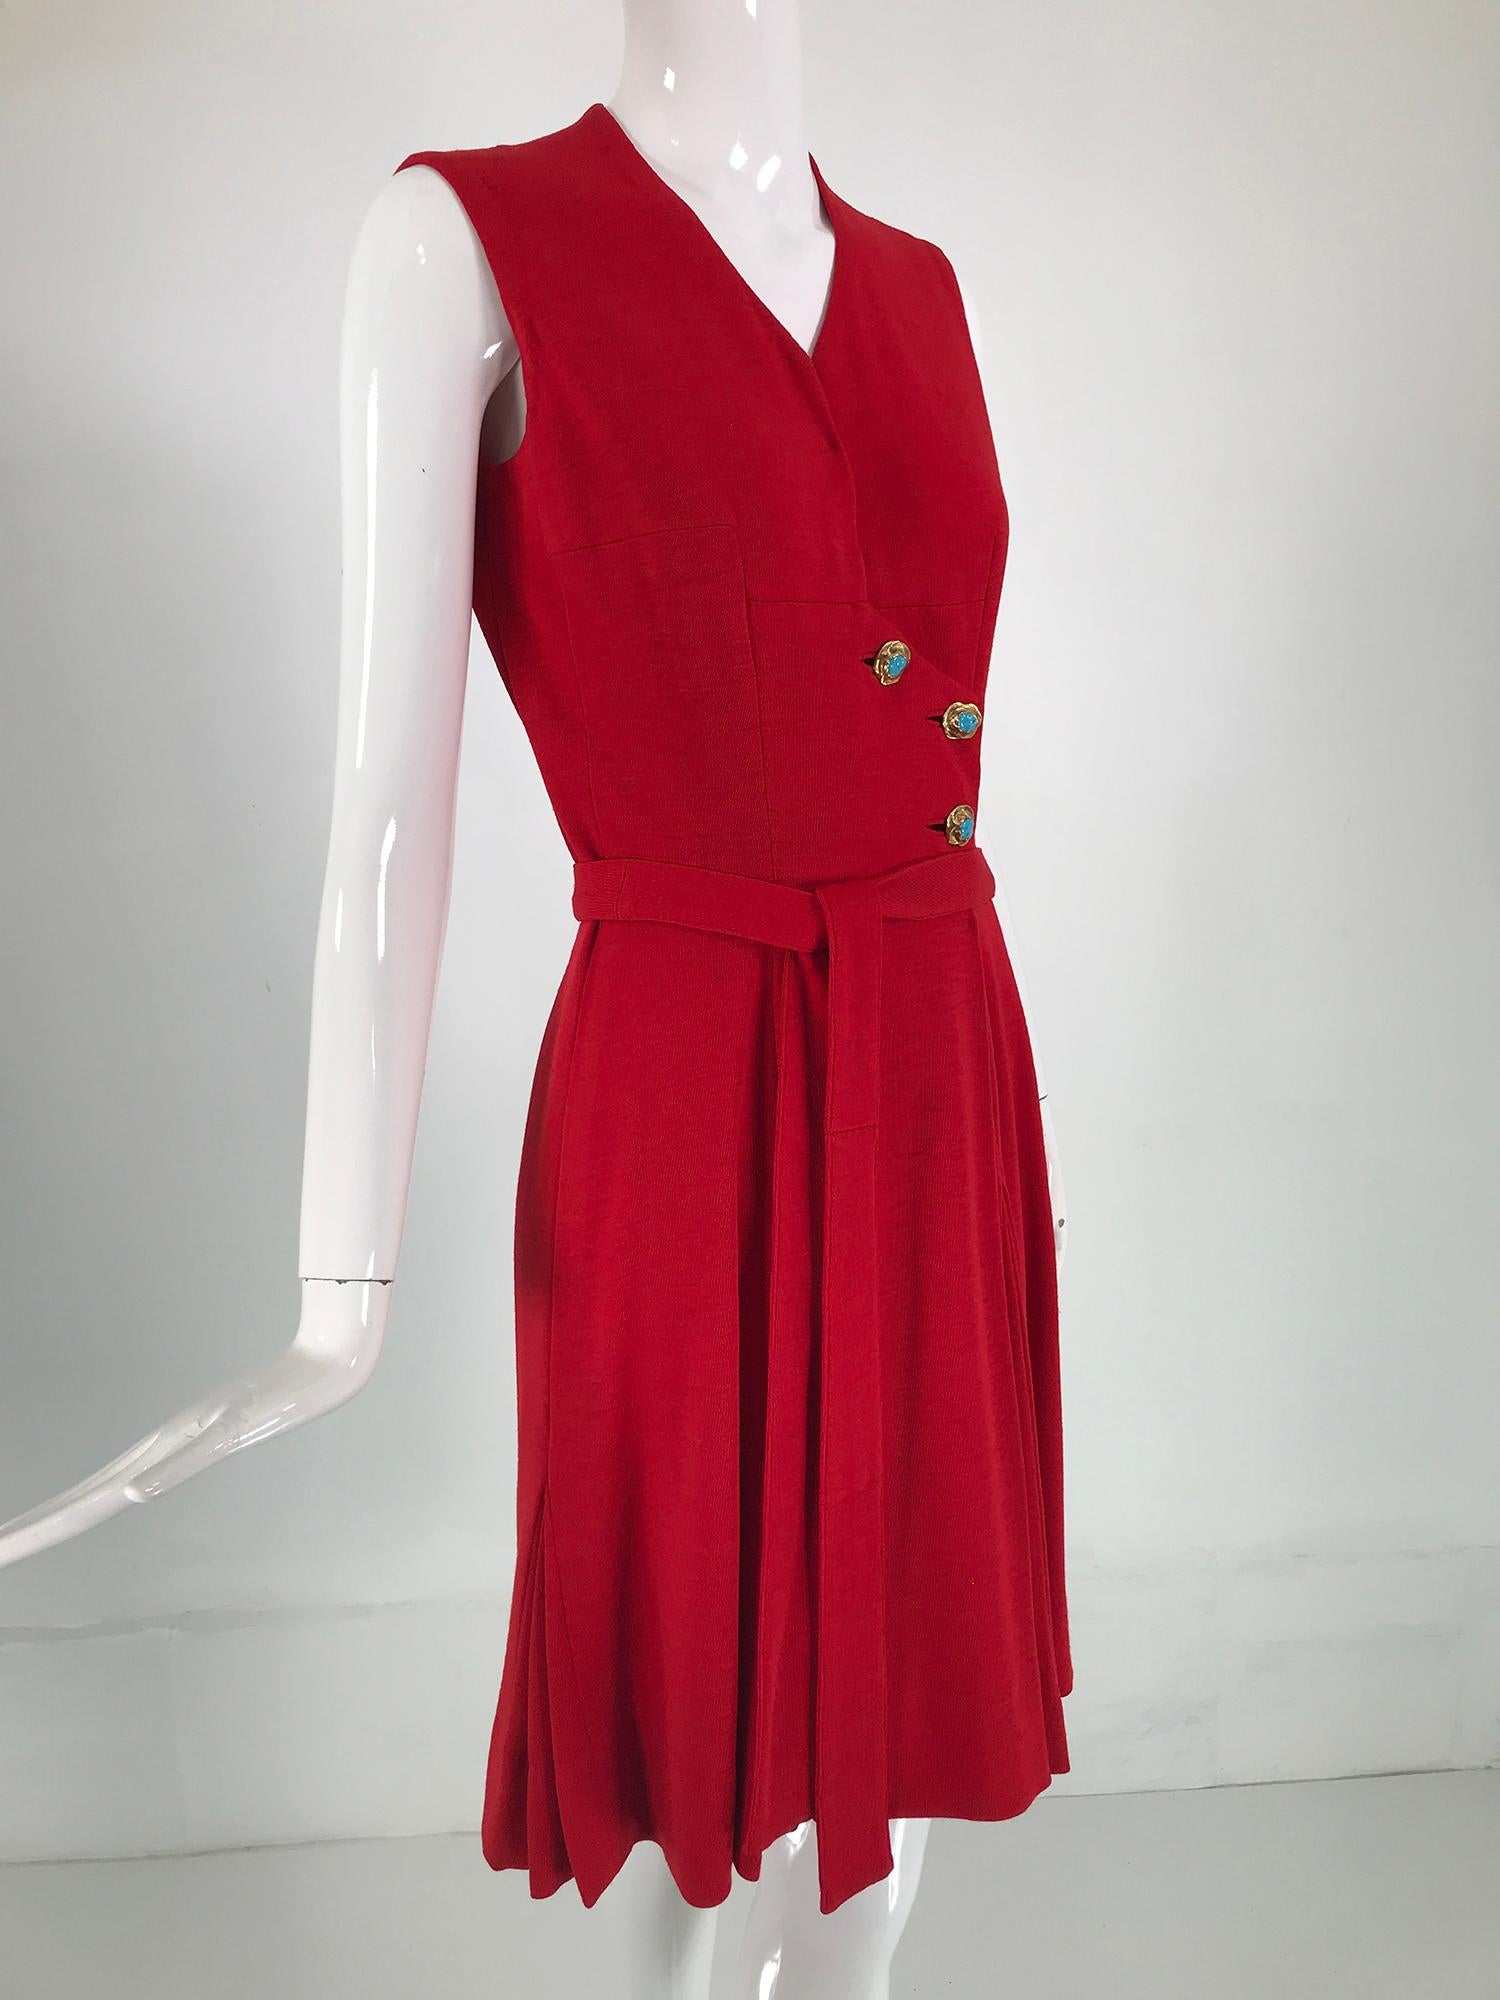 Coco Chanel Red Haute Couture 1950s 2 pc Wool Jersey Jewel Button Dress & Coat  For Sale 4